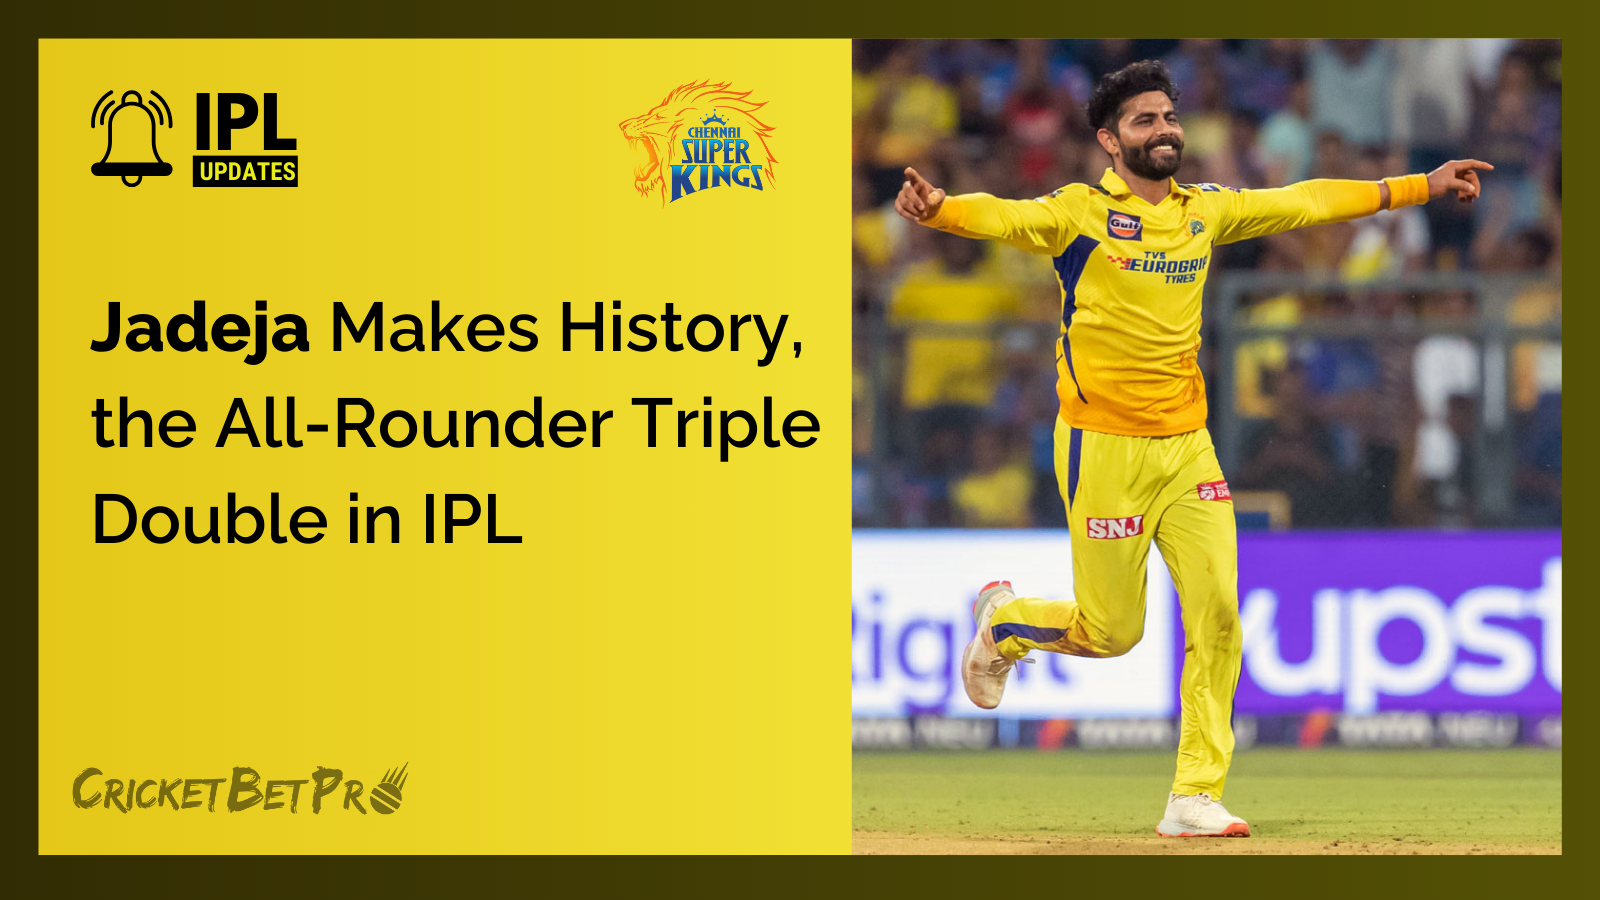 Jadeja Makes History, the All-Rounder Triple Double in IPL